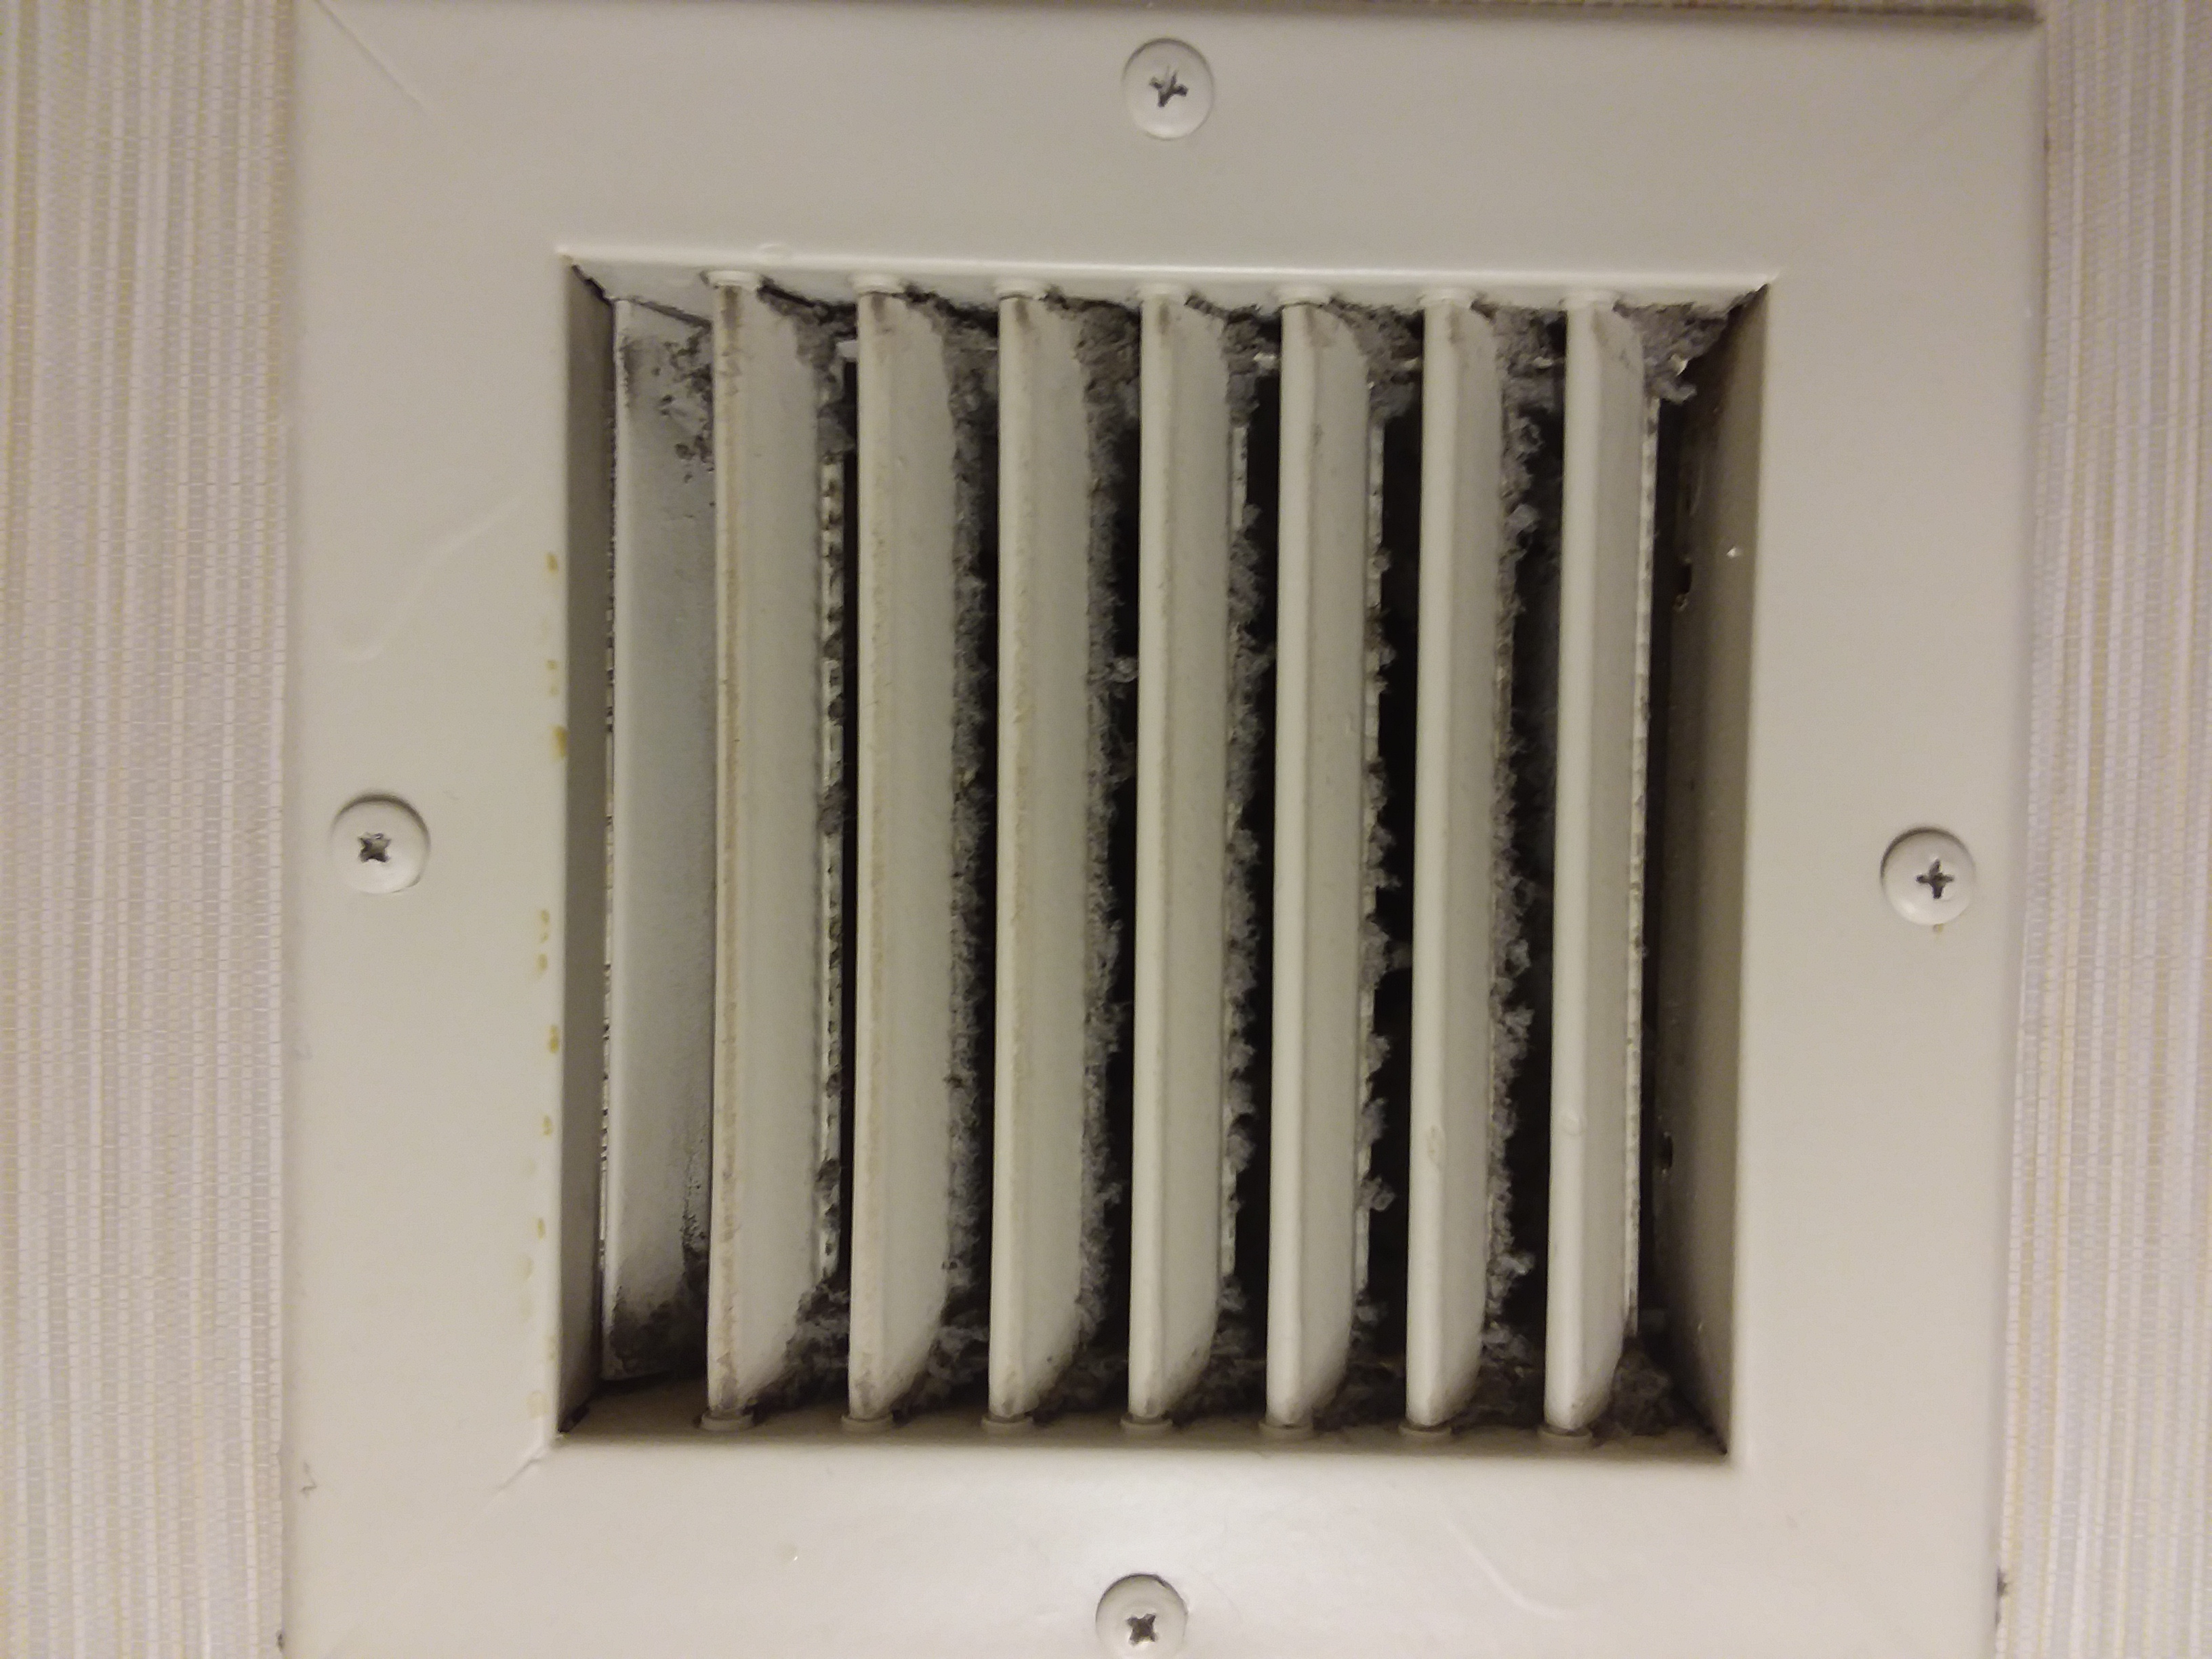 Another Not-So-Great Grate